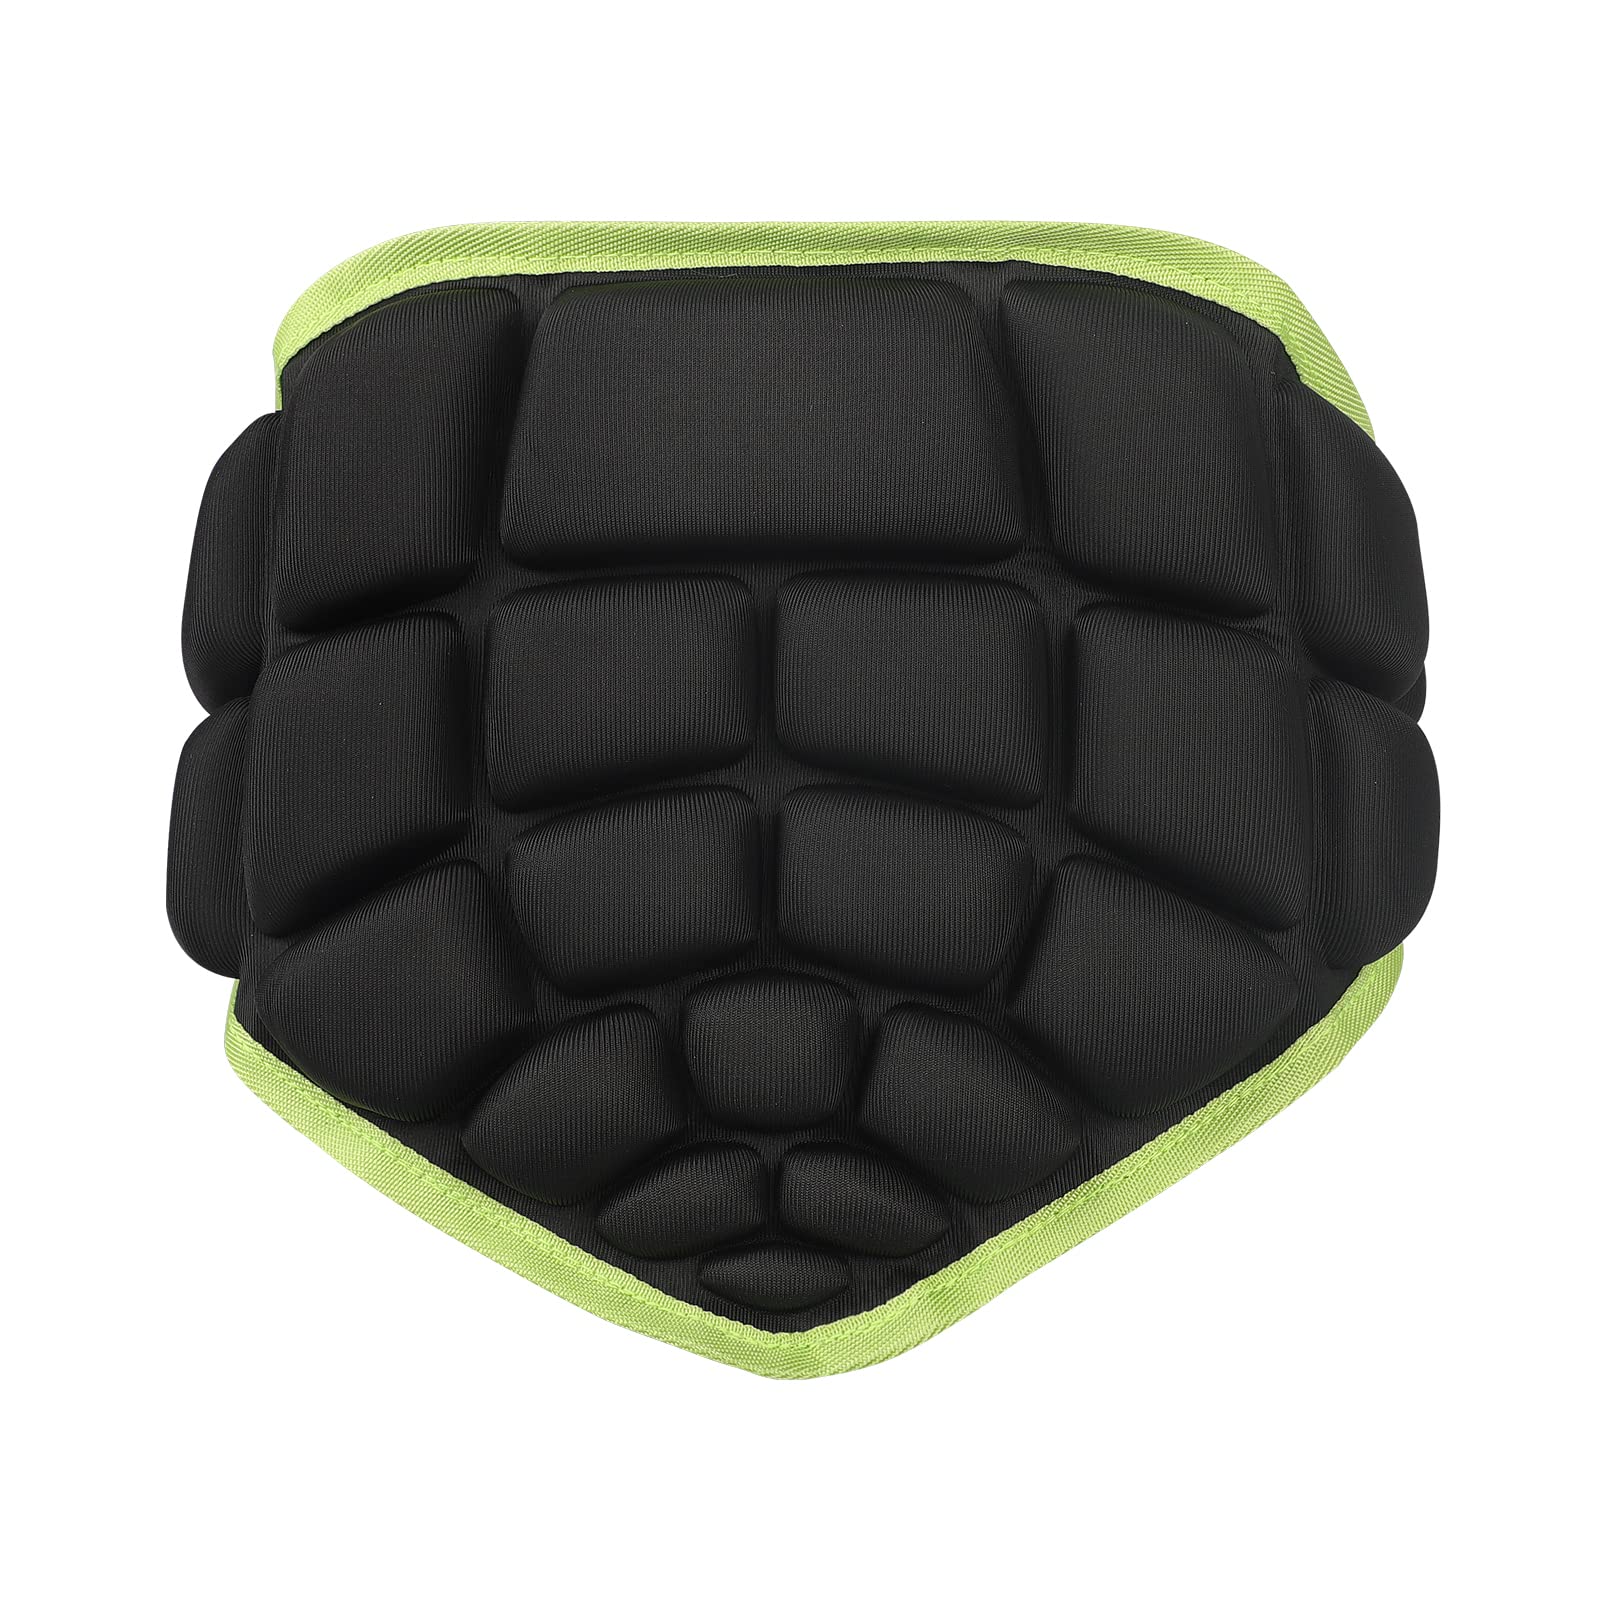 Protective Gear Kids Pads, Hip Butt Protection